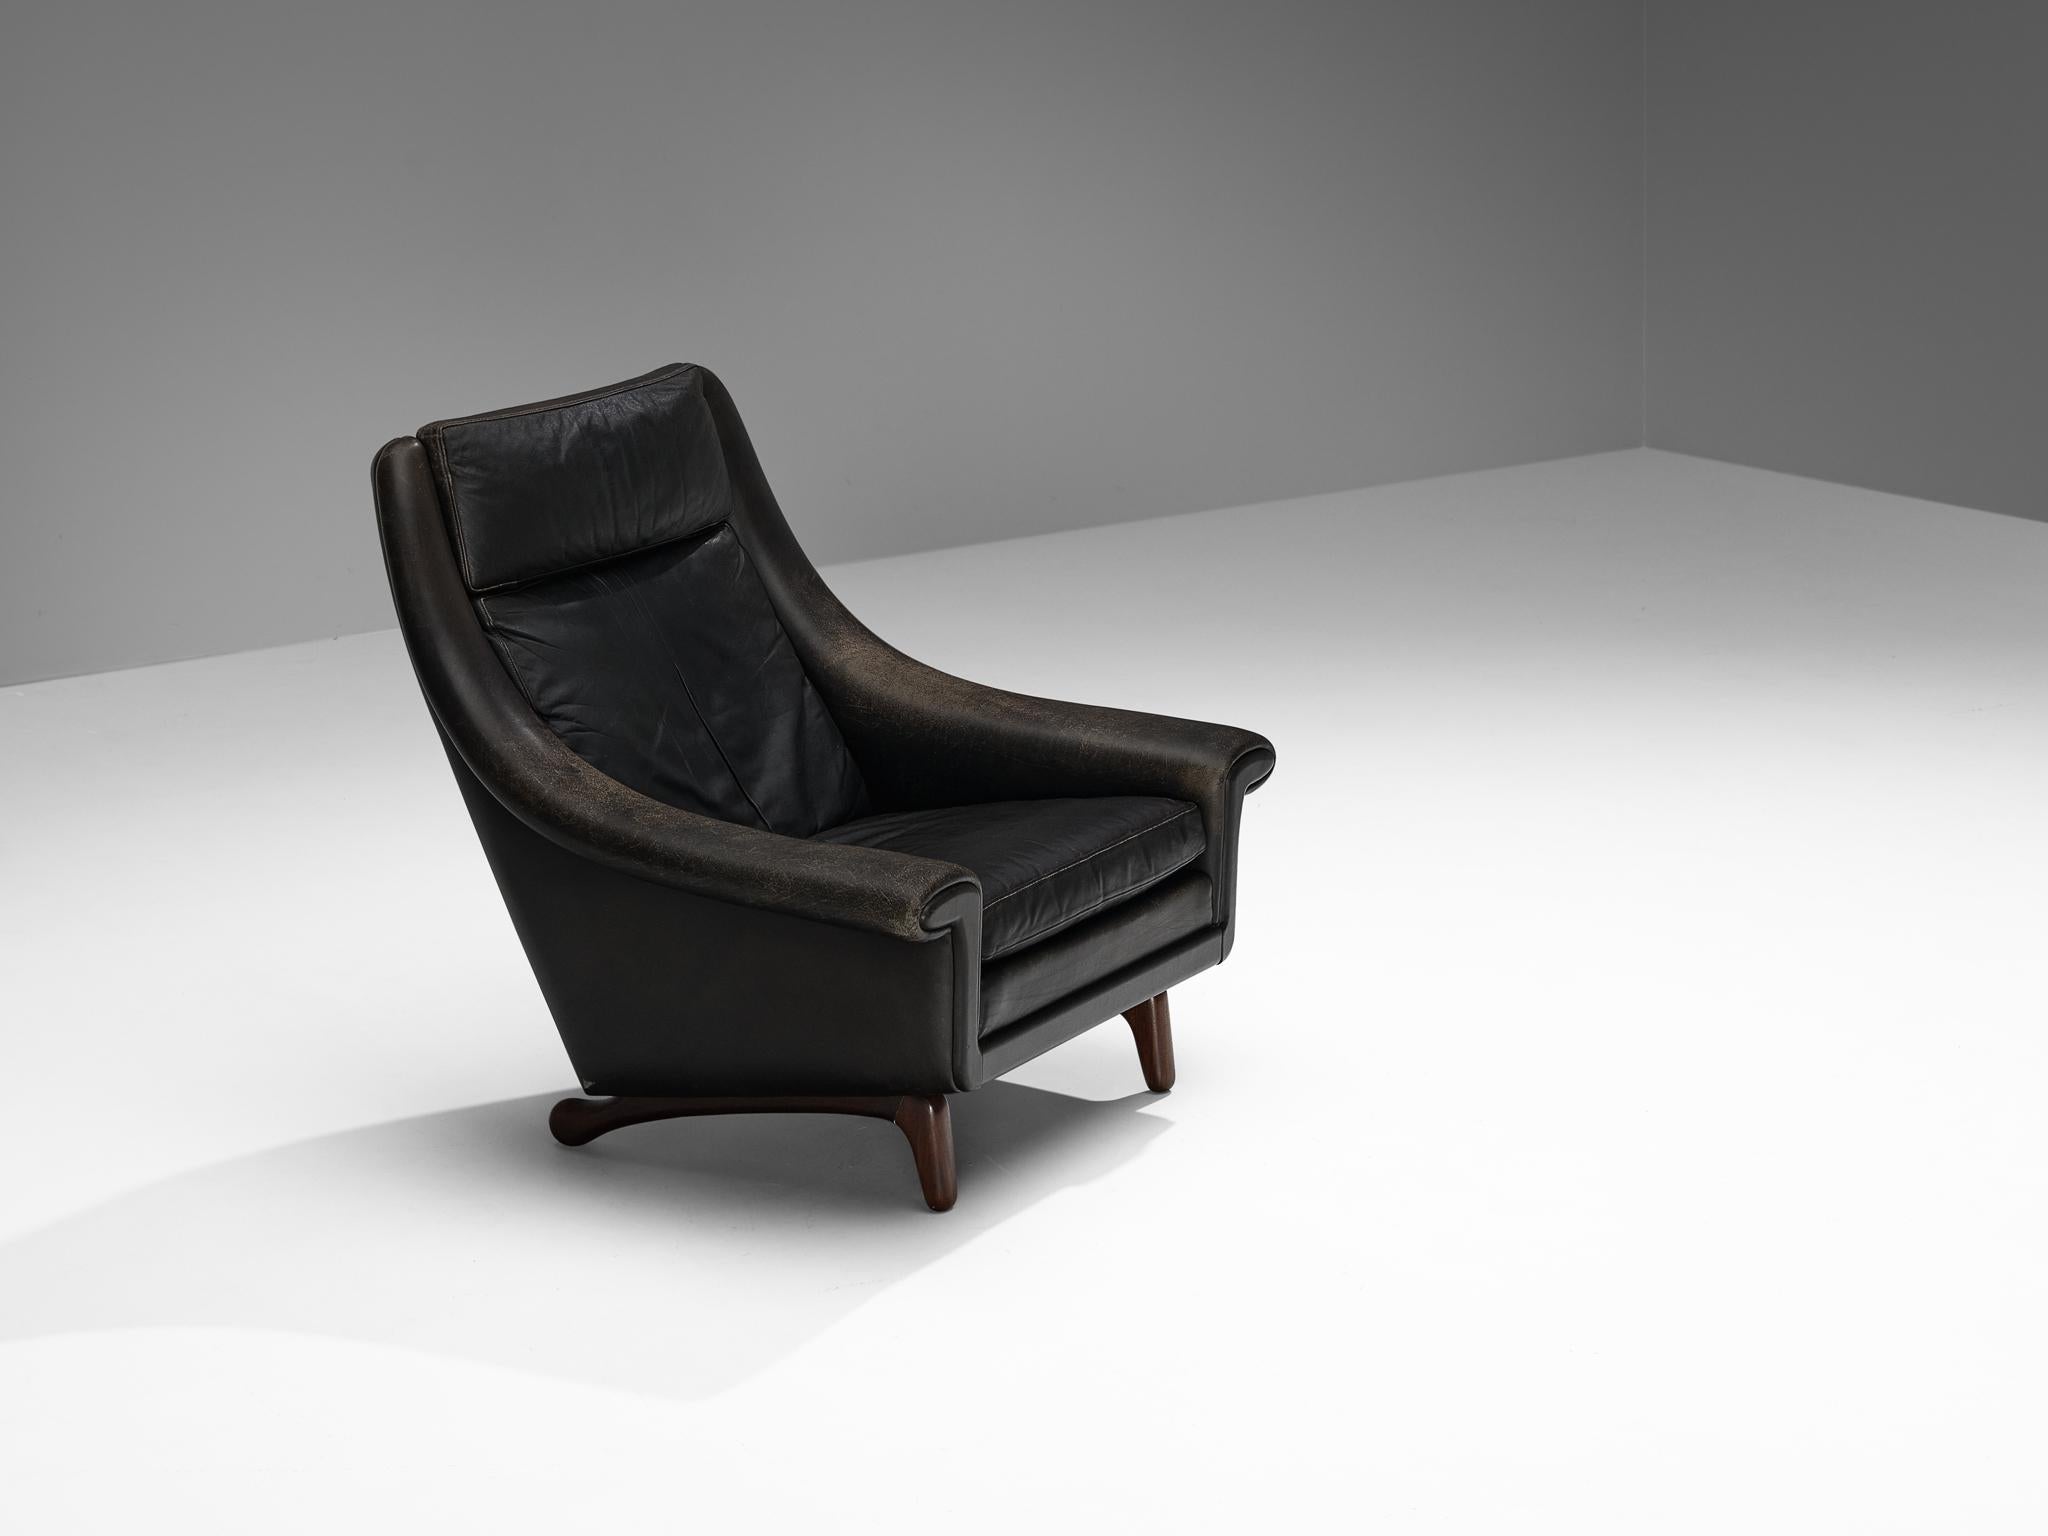 Mid-20th Century Danish Lounge Chair in Black Leather and Teak For Sale